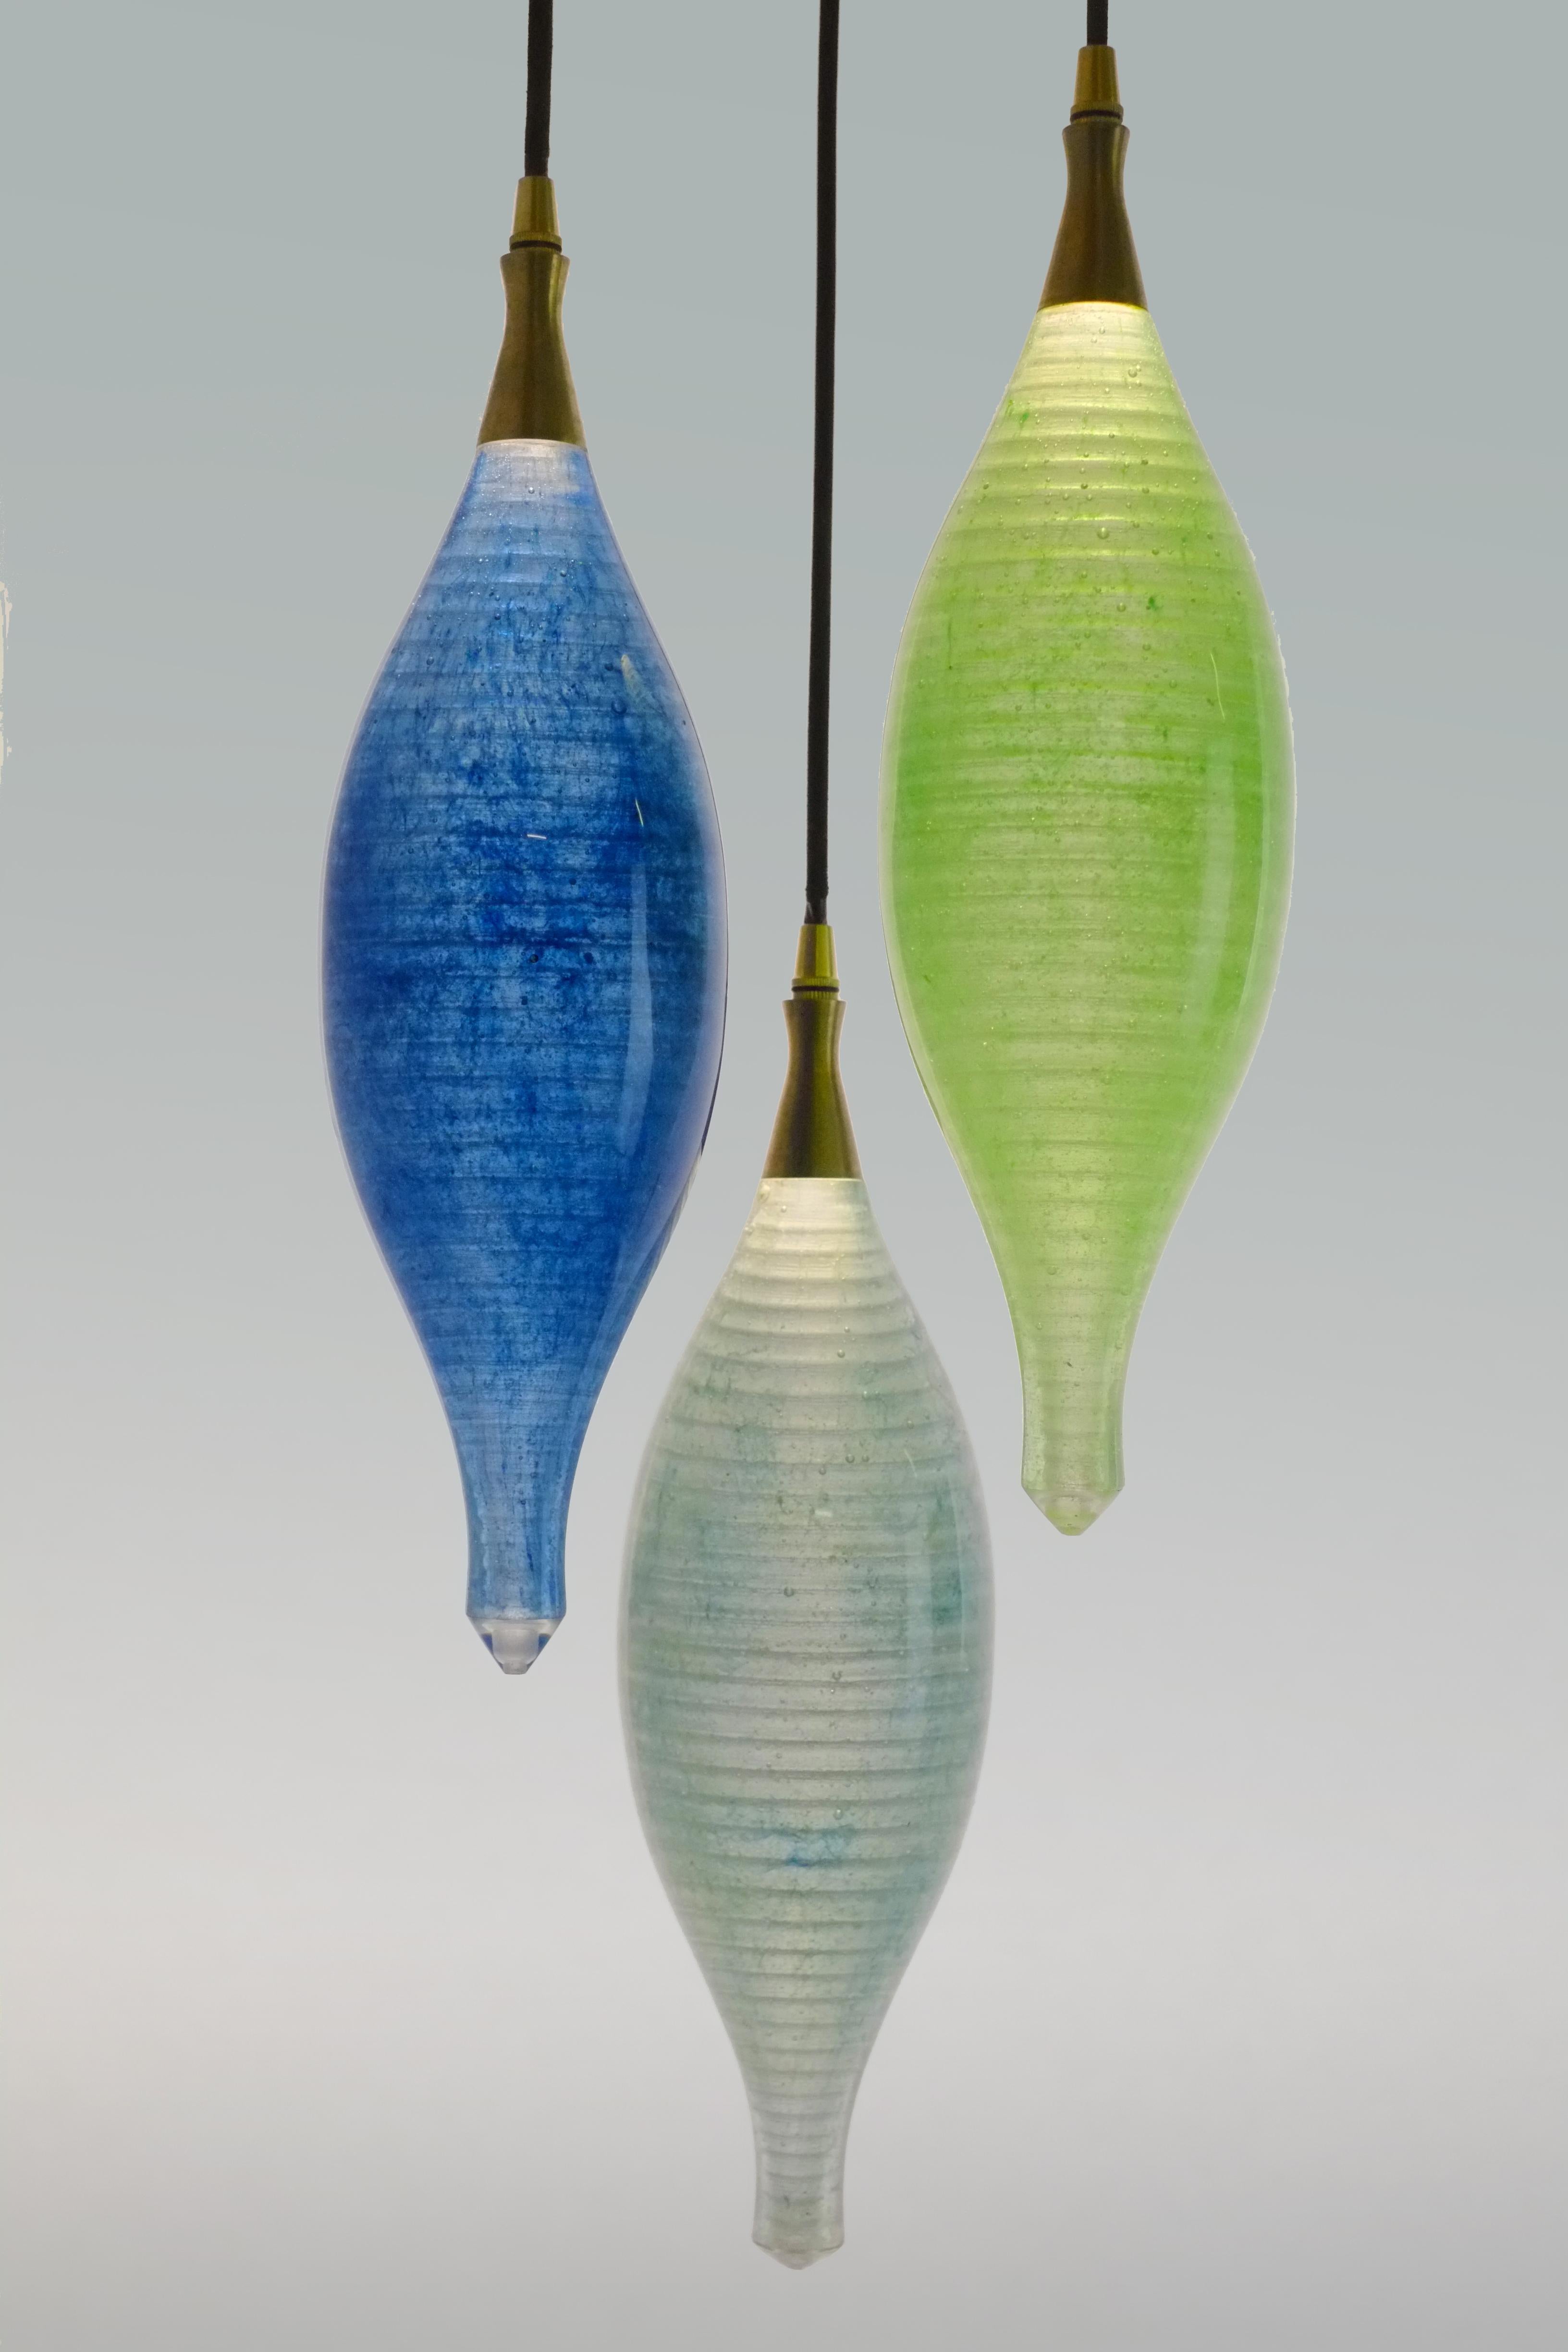 Contemporary Glass Lamp: Semazen Crystal Hanging Pendant Light Citron Green In New Condition For Sale In Ulcombe, Kent